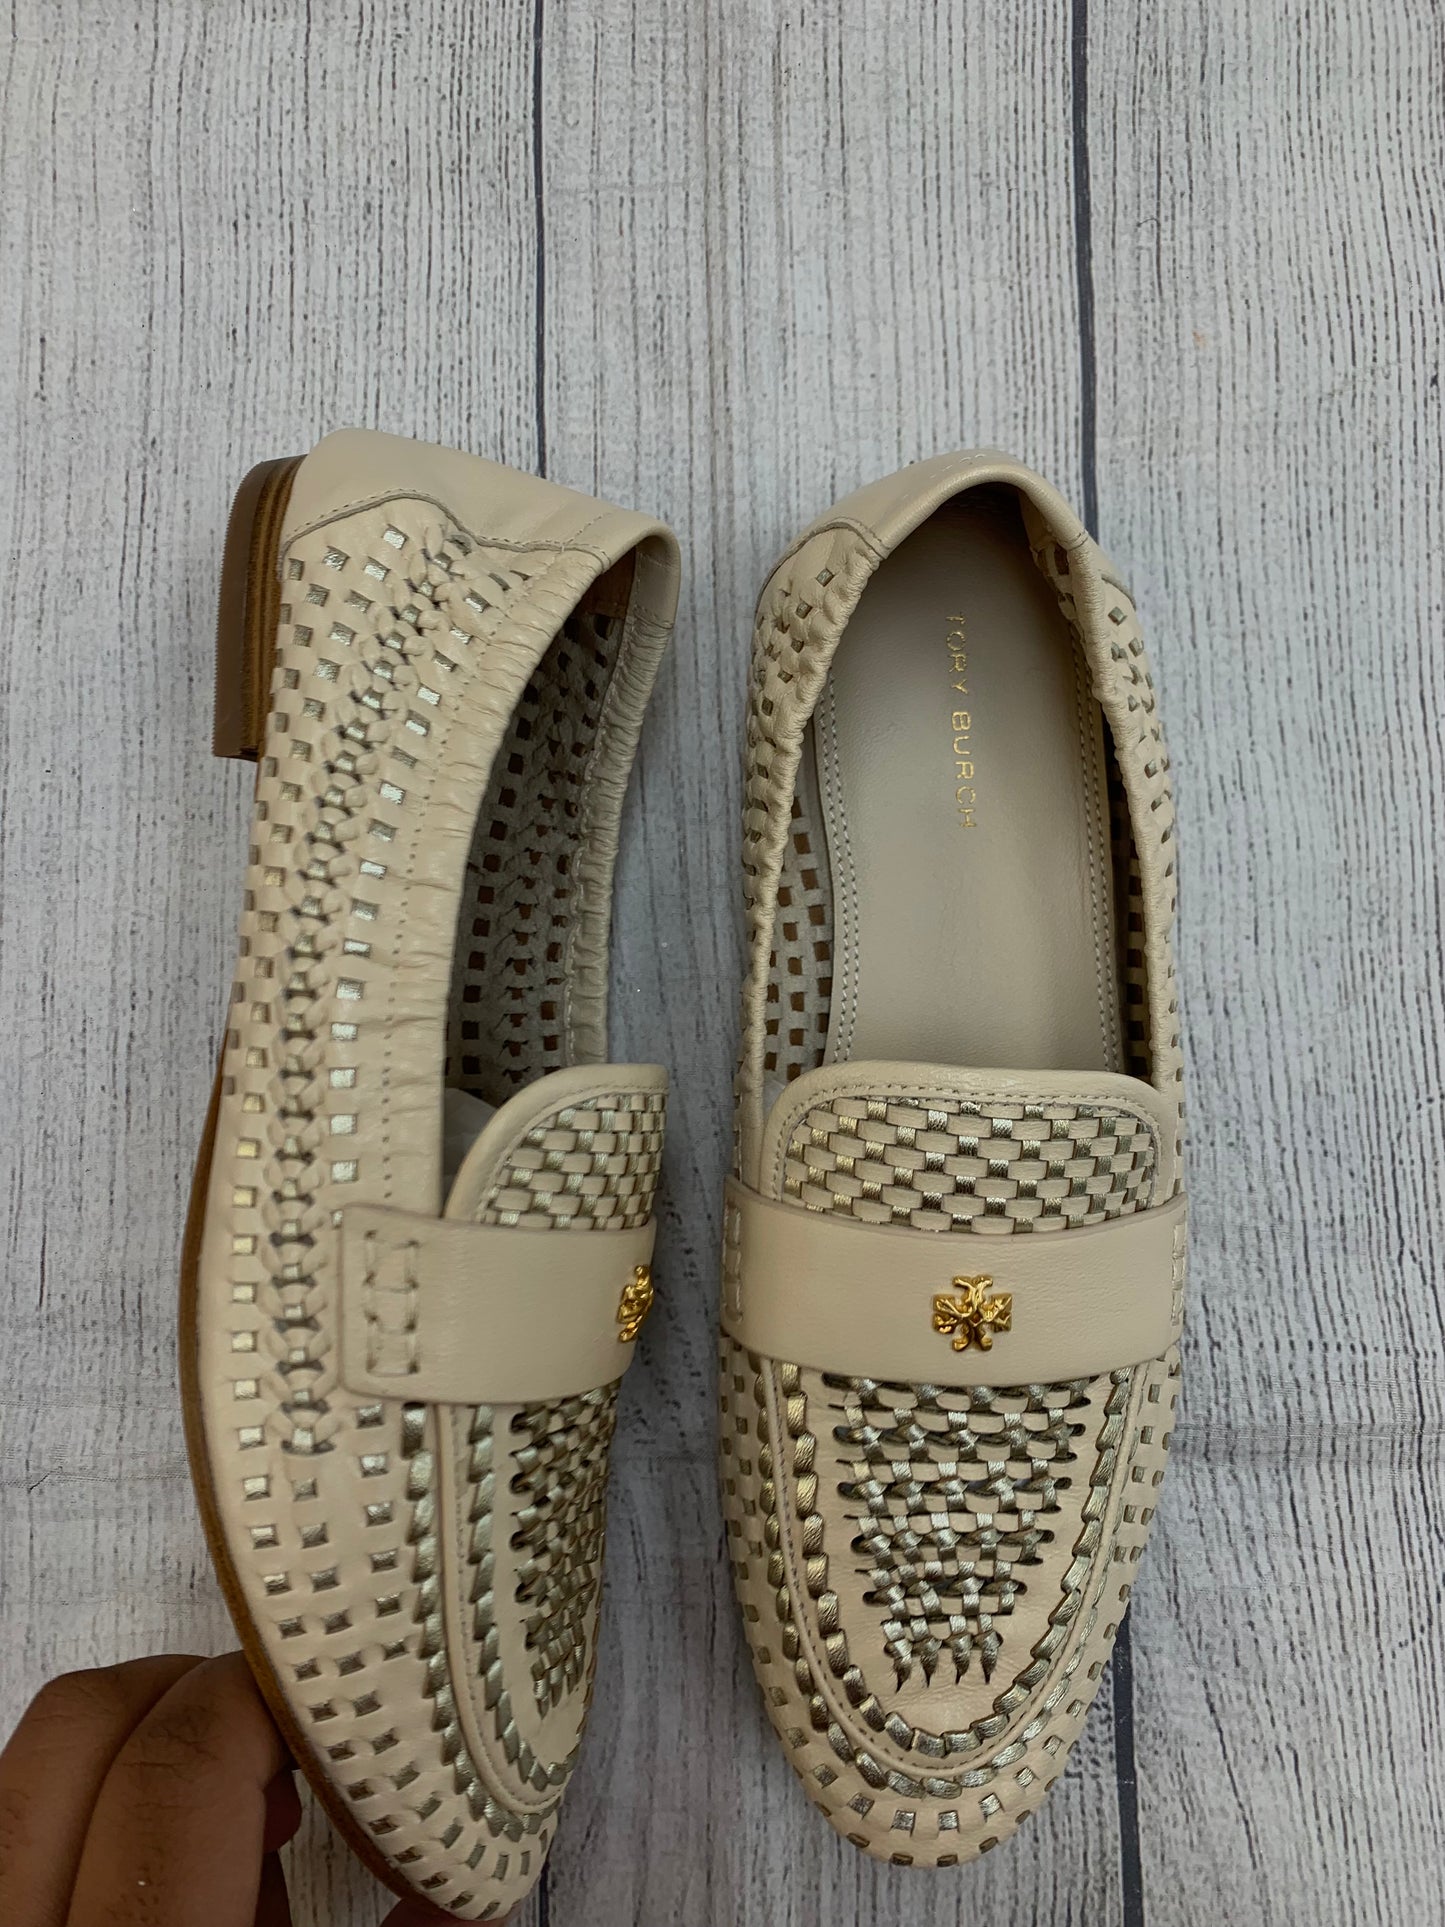 Shoes Flats Ballet By Tory Burch  Size: 7